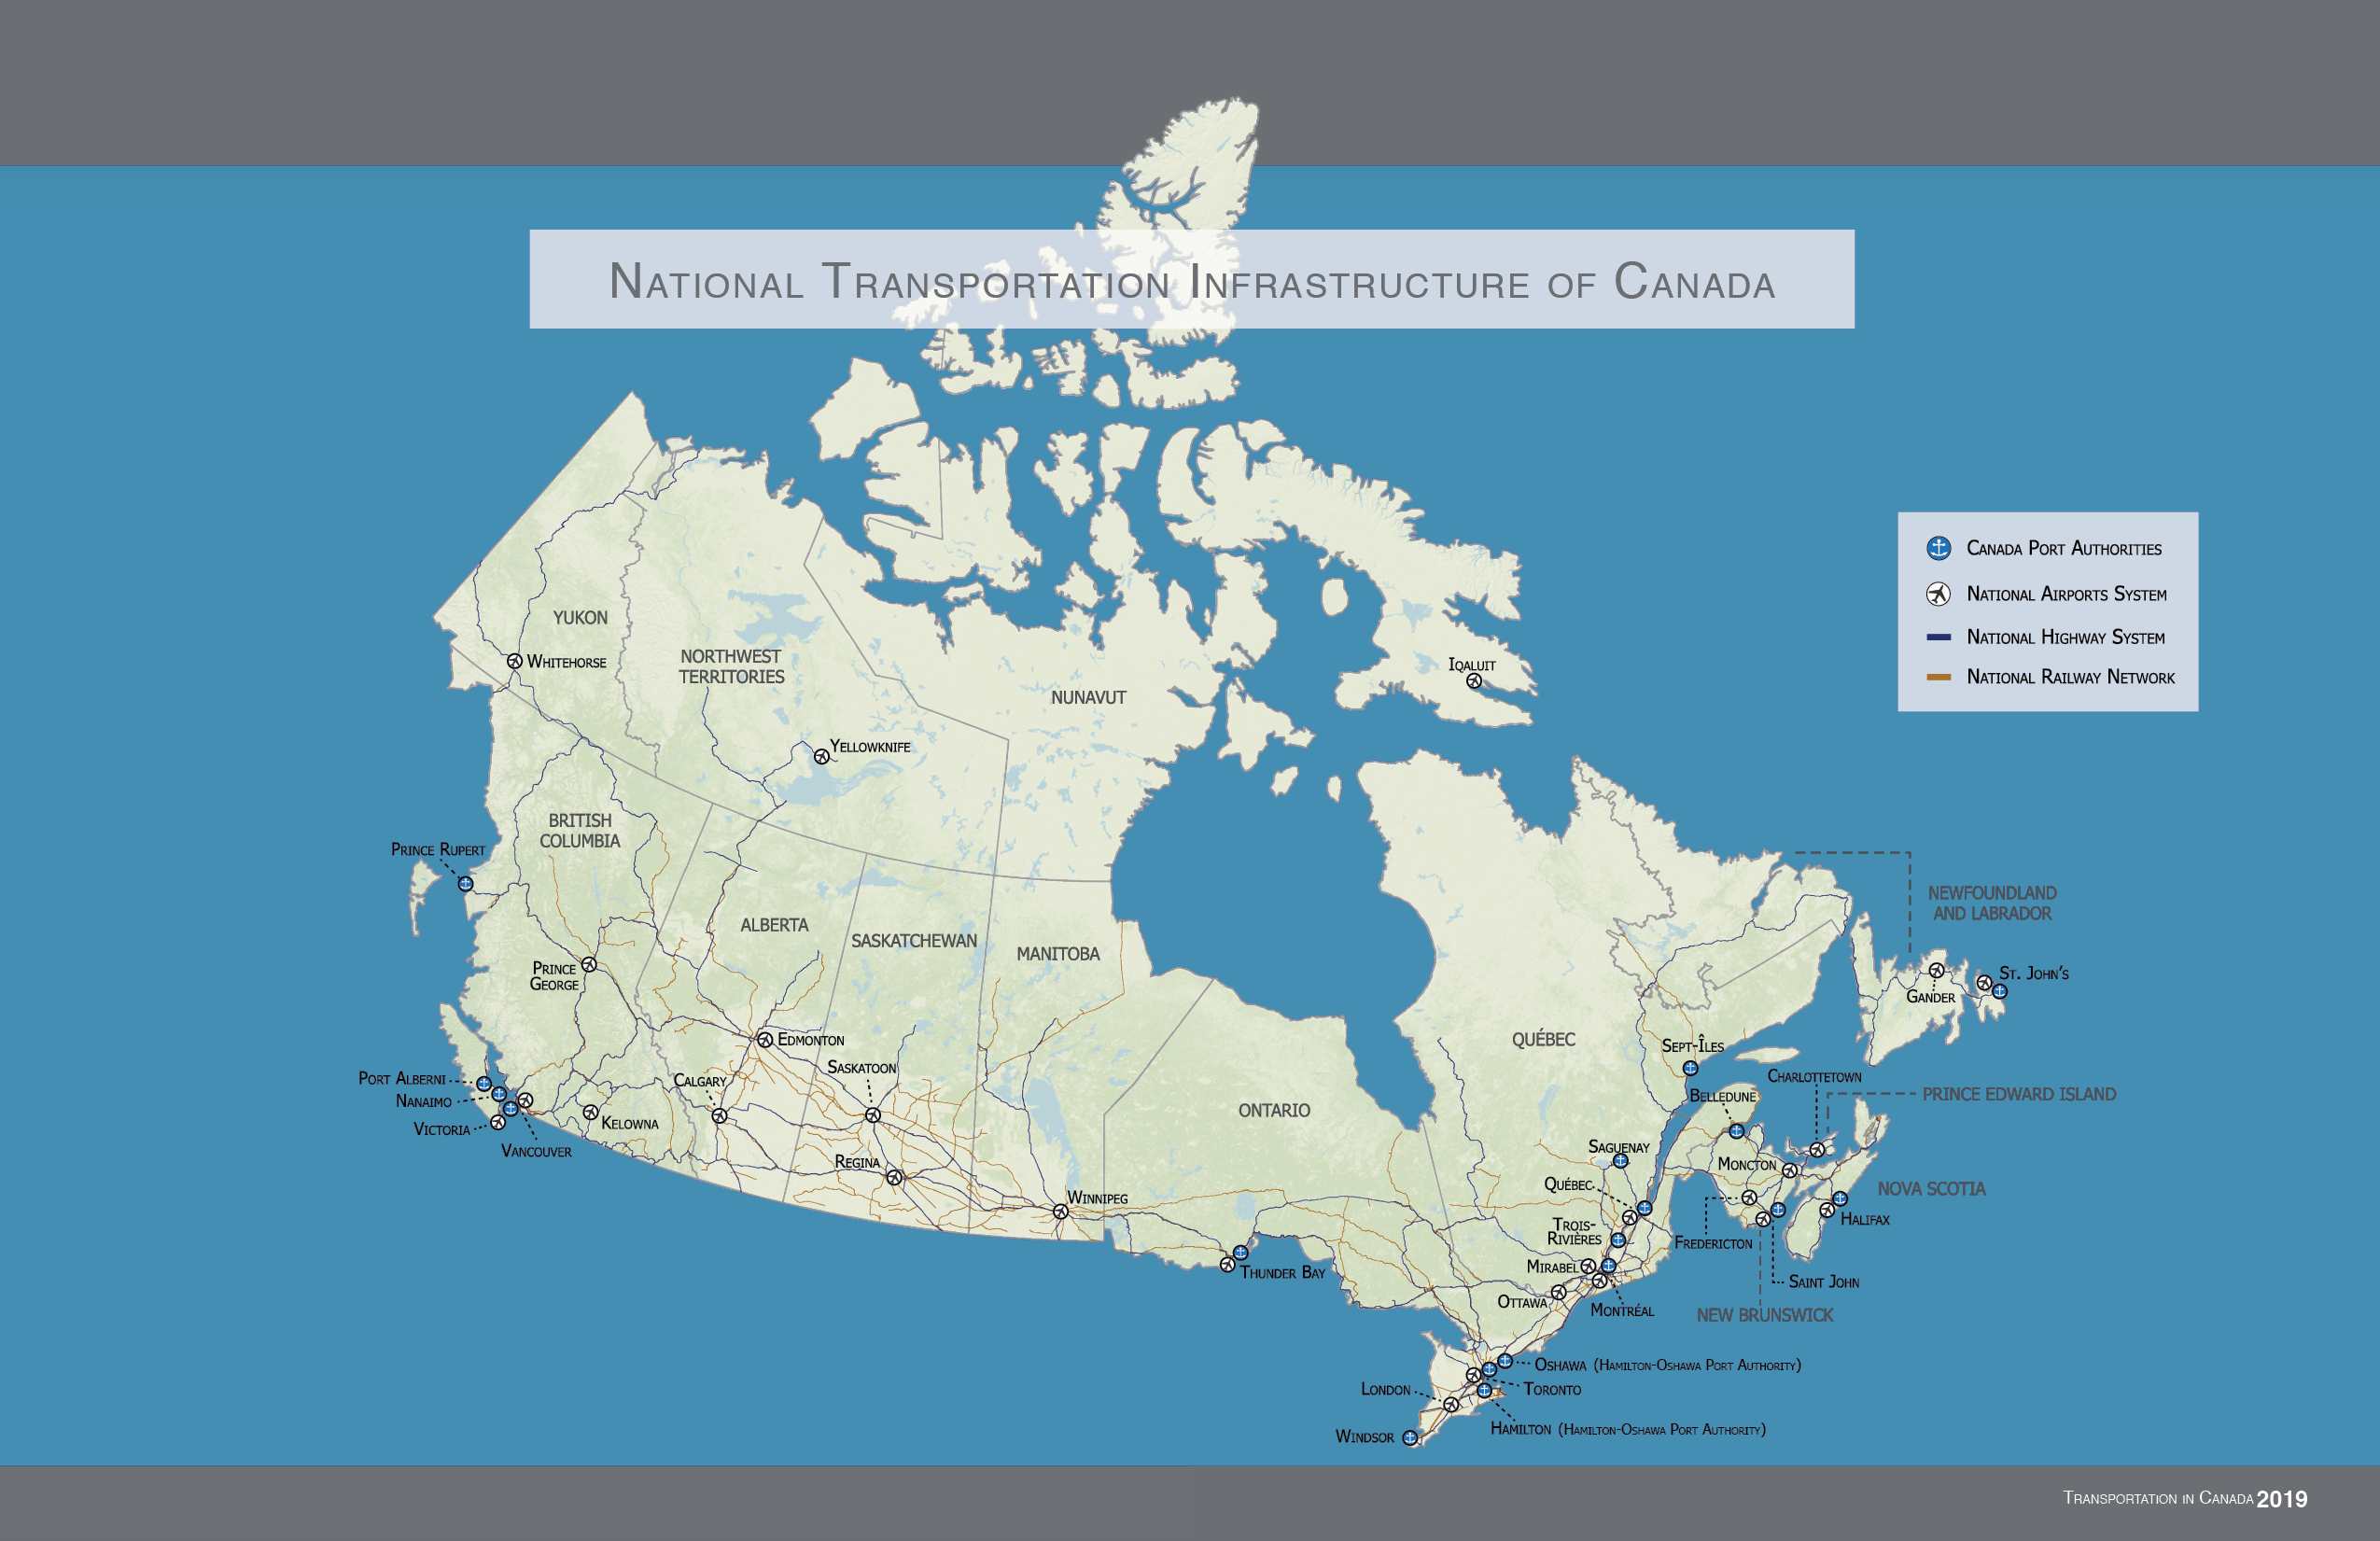 National Transportation Infrastructure of Canada map